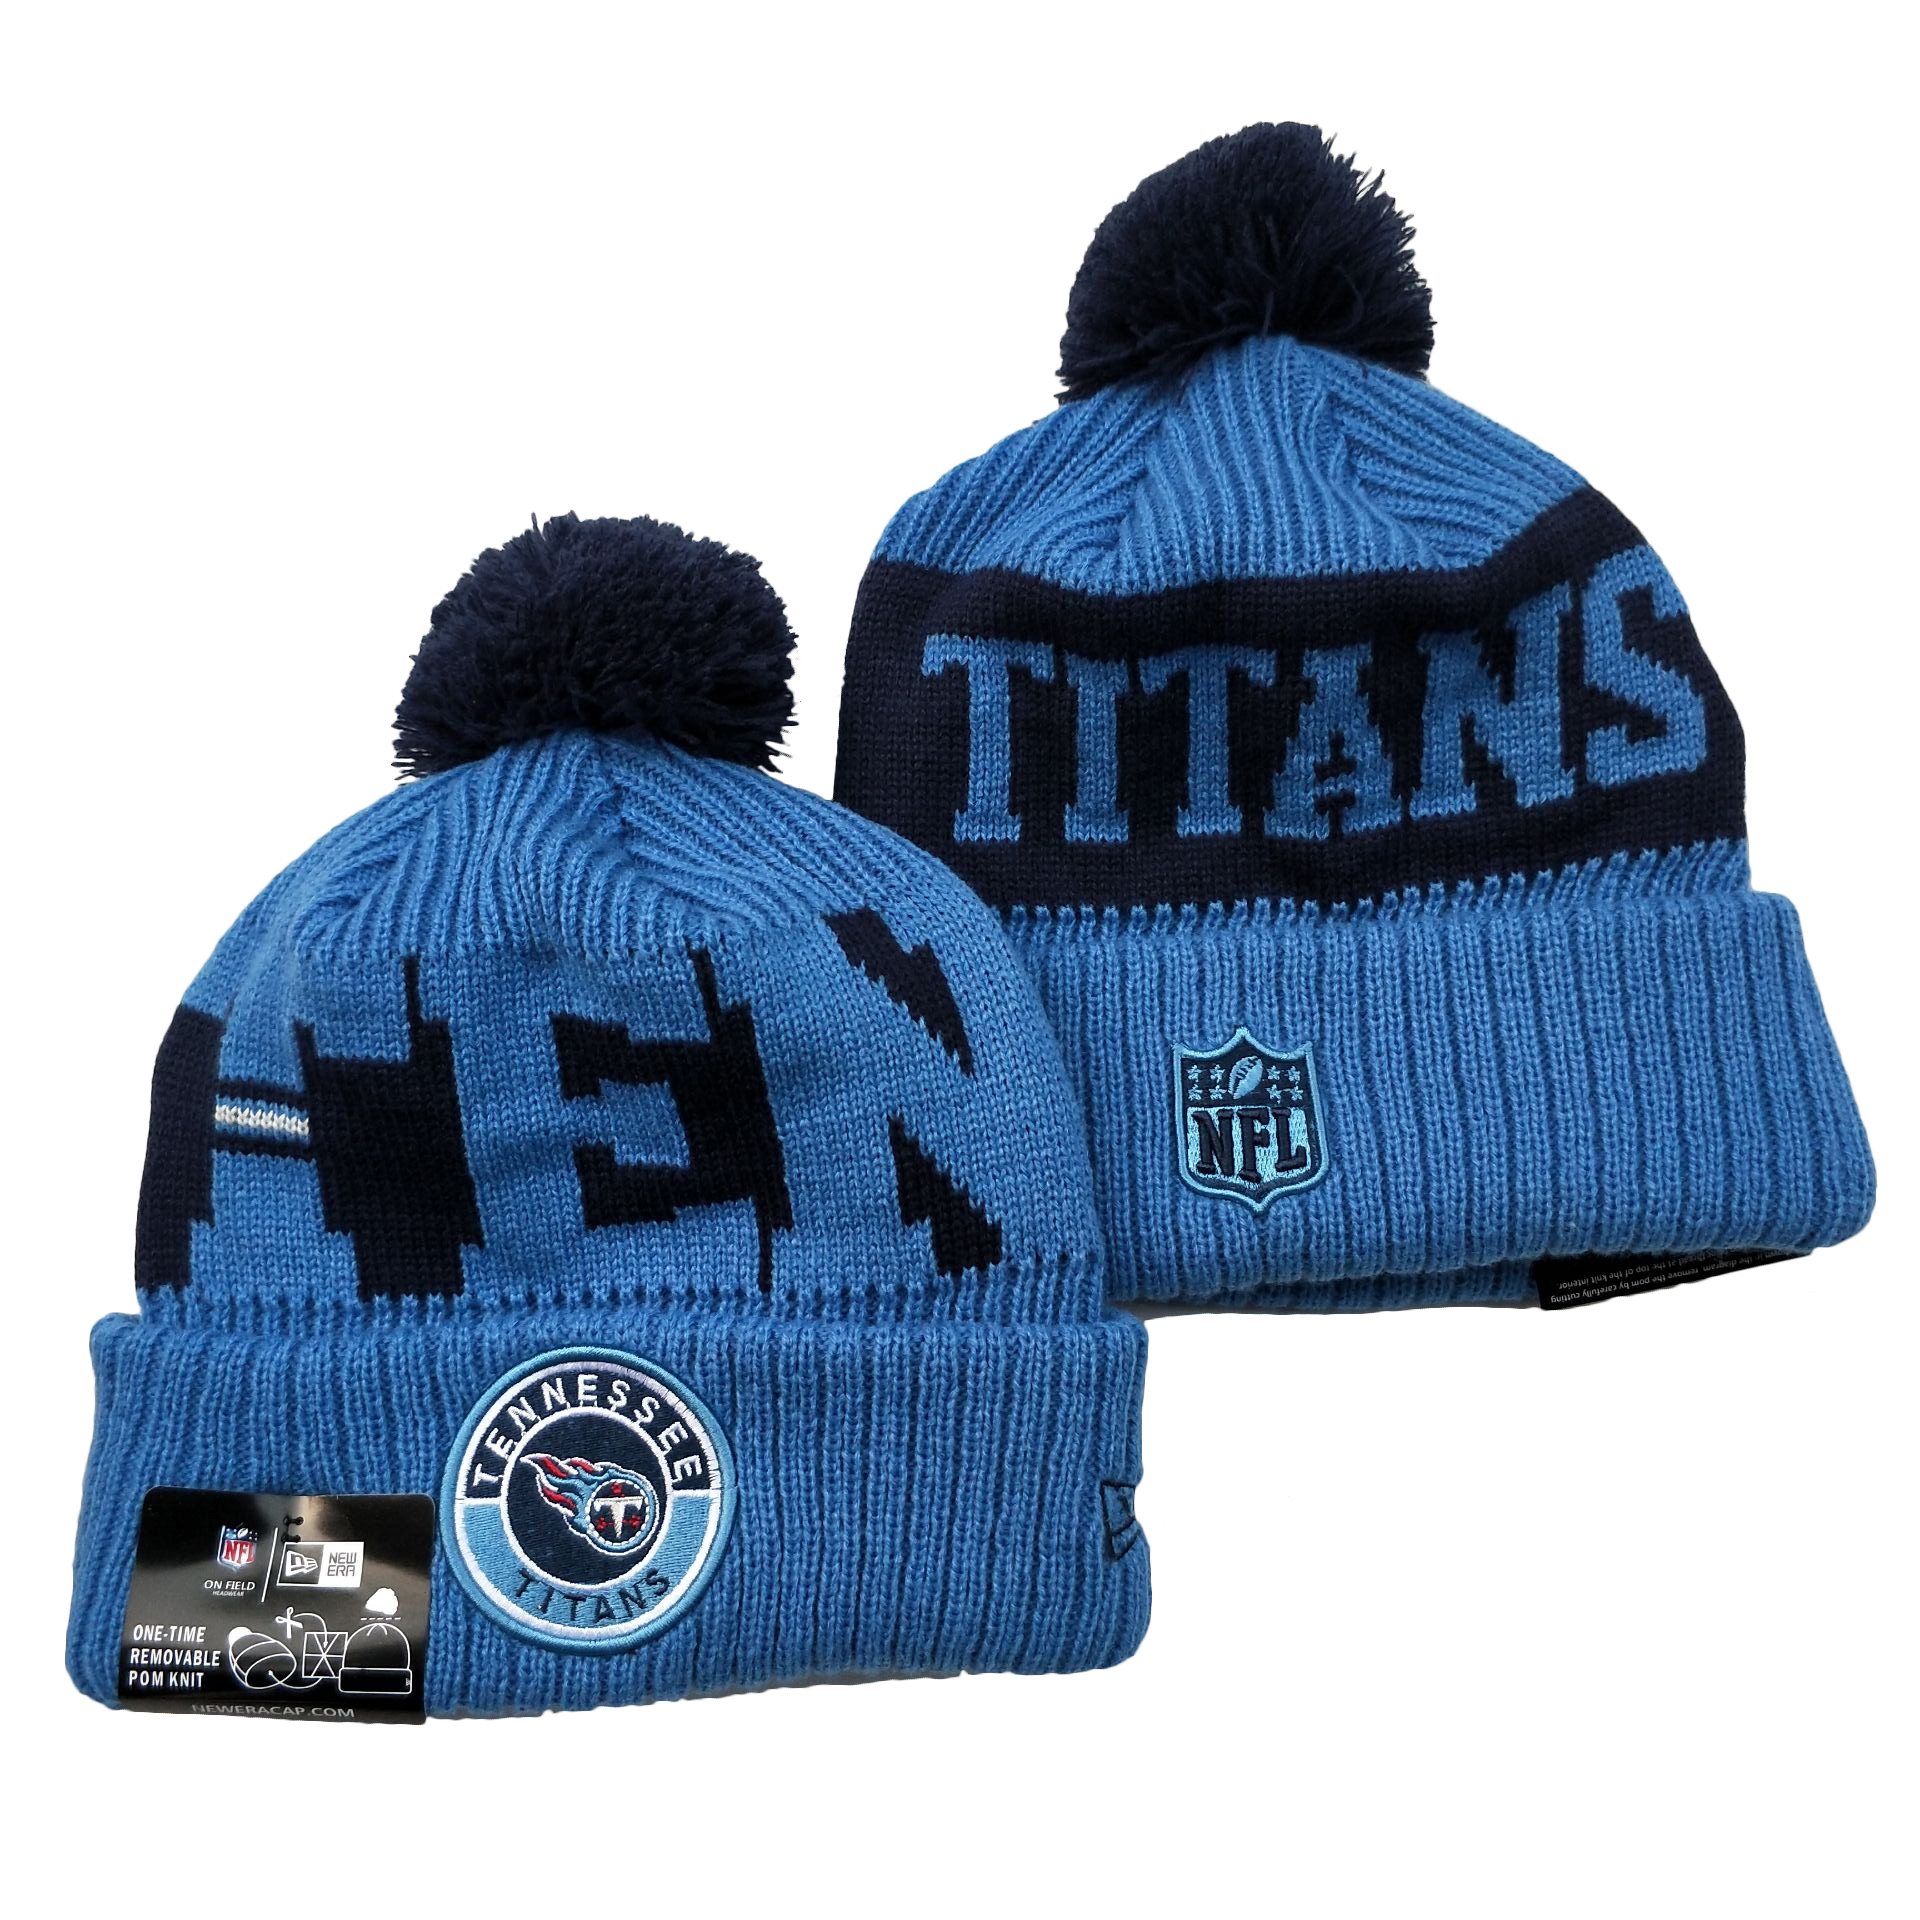 Tennessee Titans Knit Hats -11